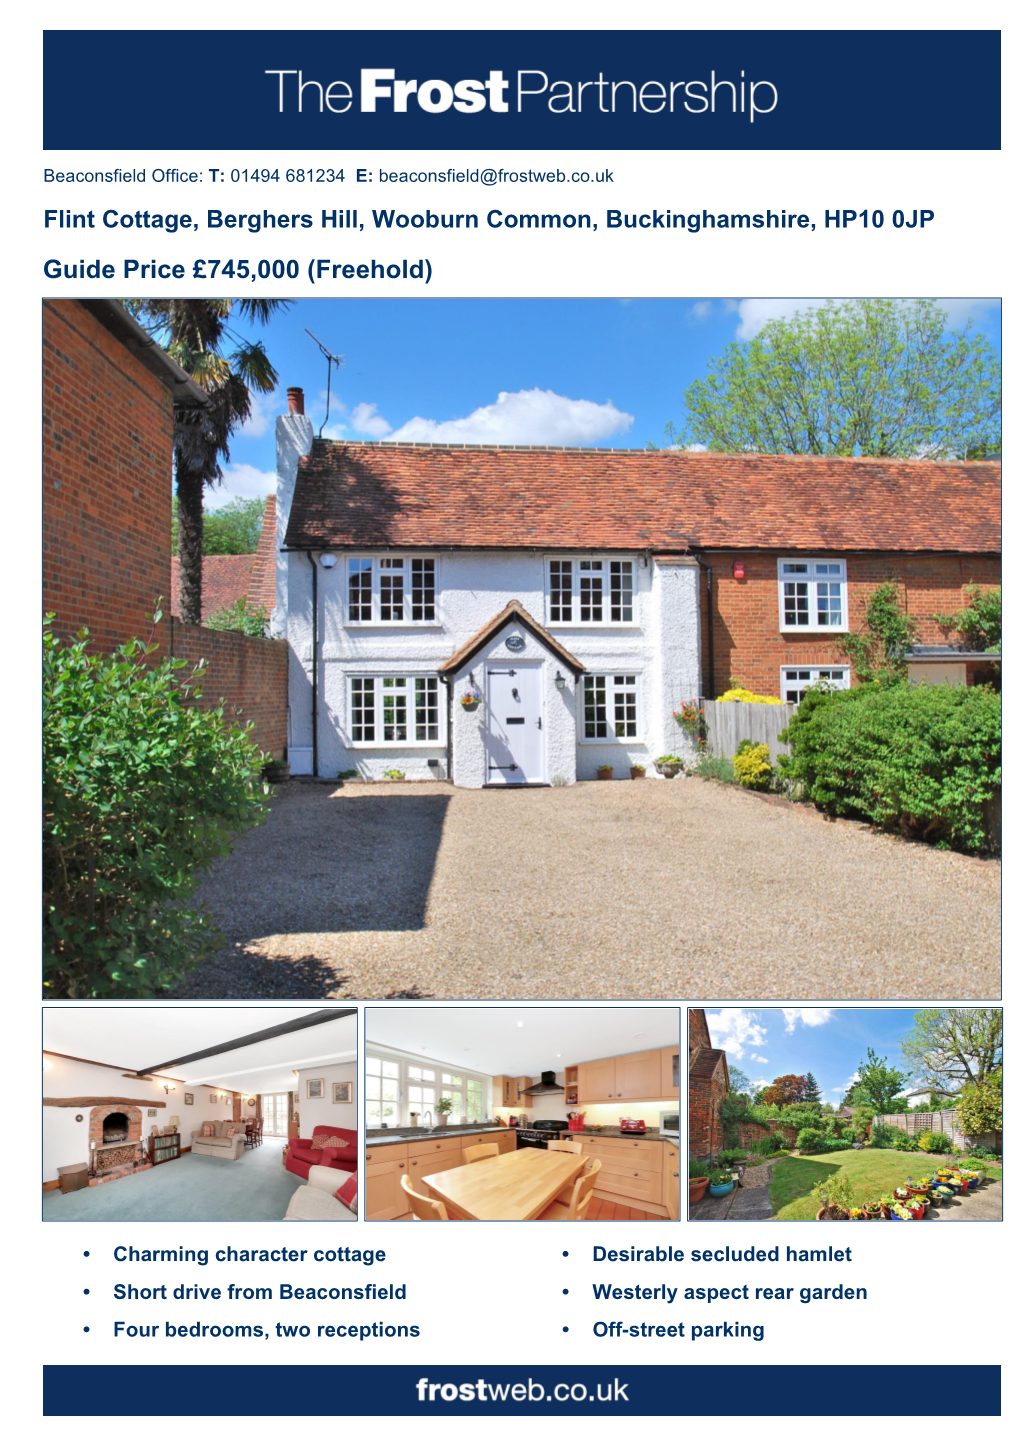 Guide Price £745,000 (Freehold)